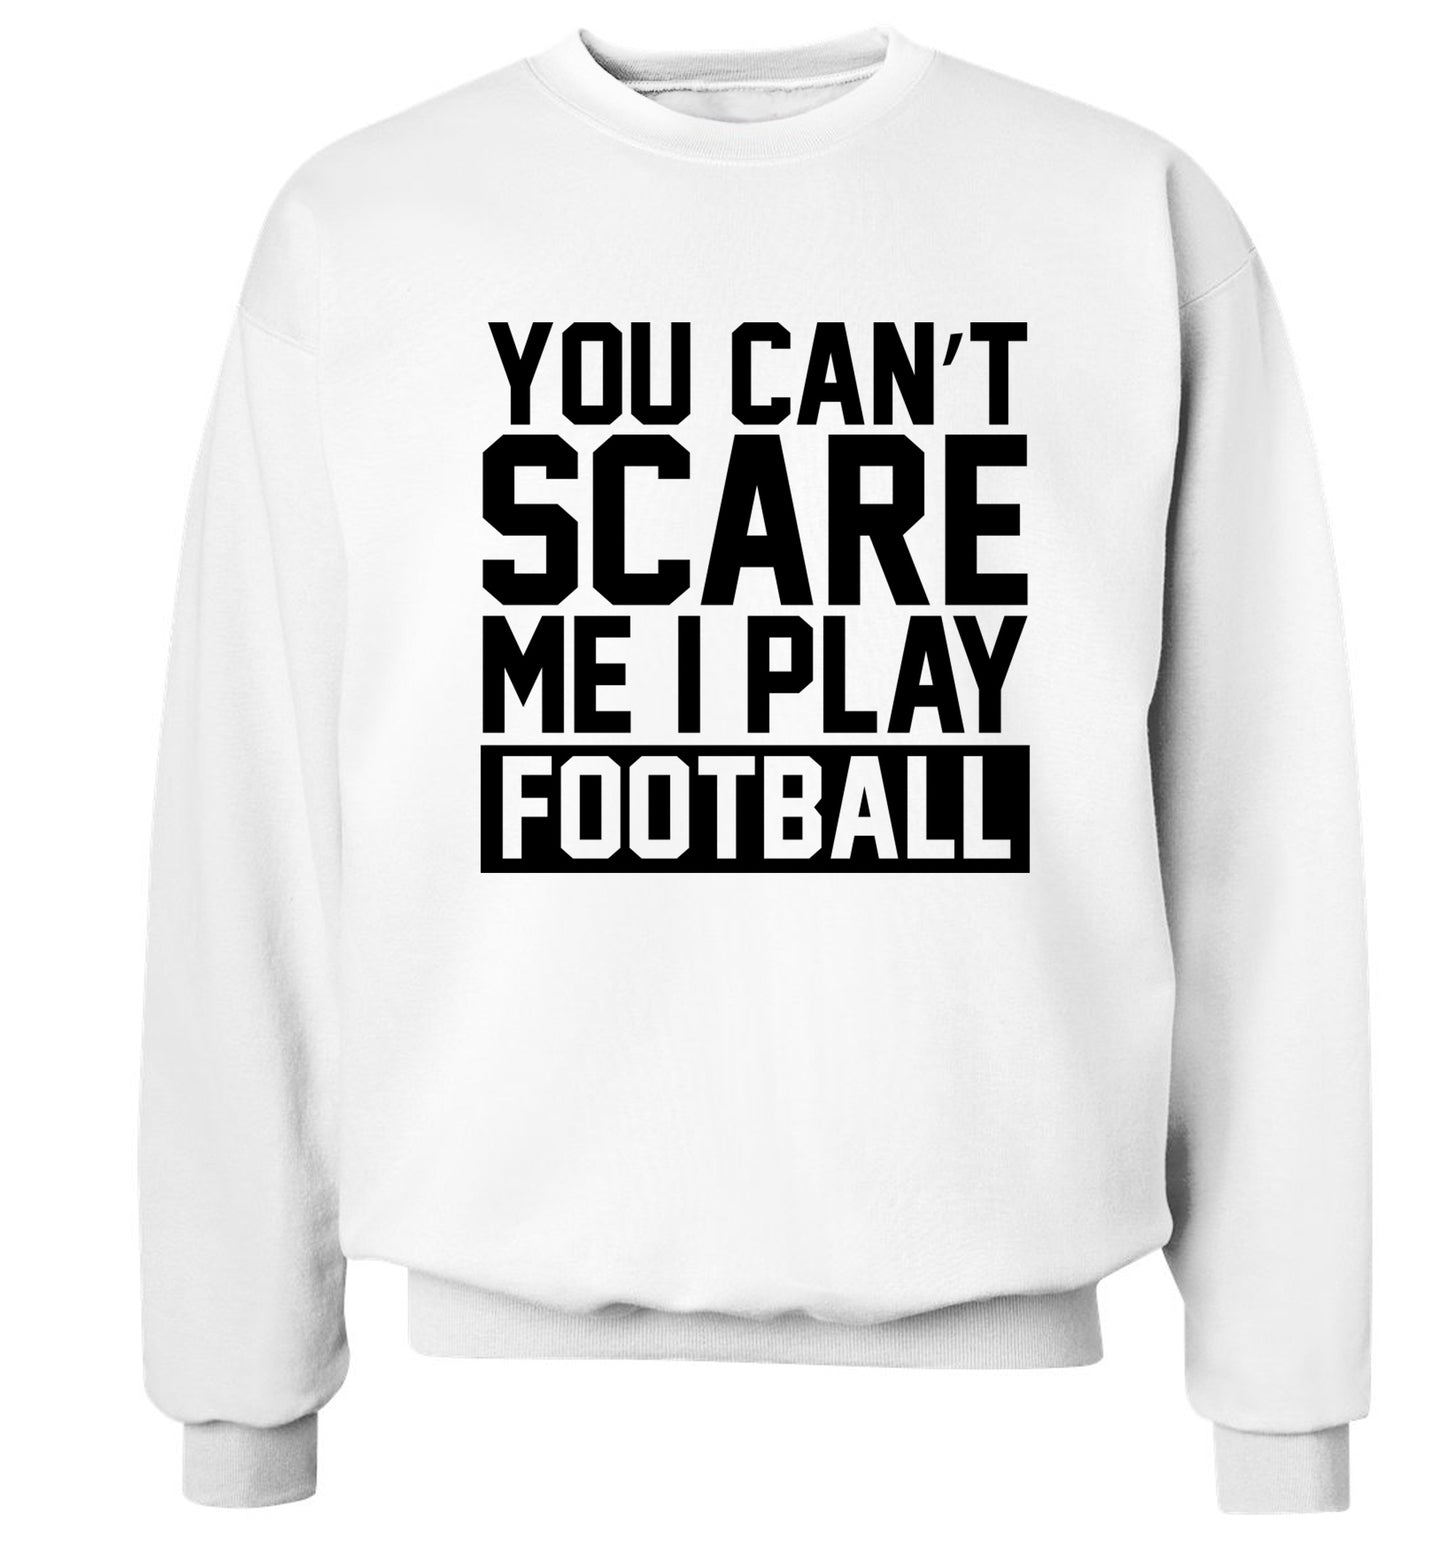 You can't scare me I play football Adult's unisex white Sweater 2XL